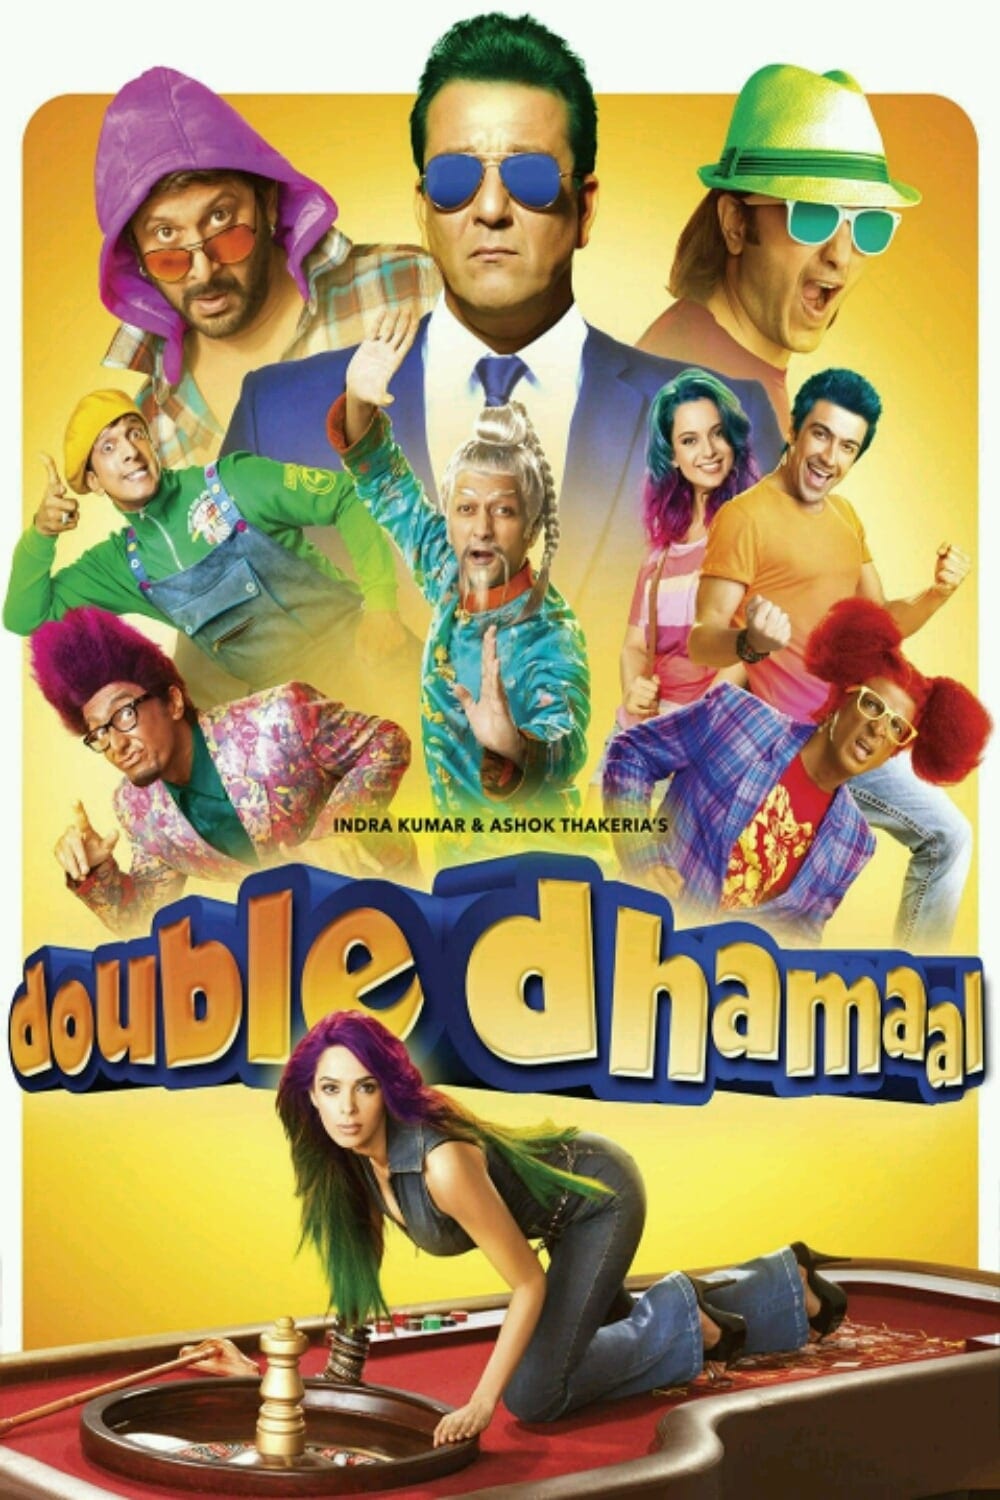 Poster for the movie "Double Dhamaal"